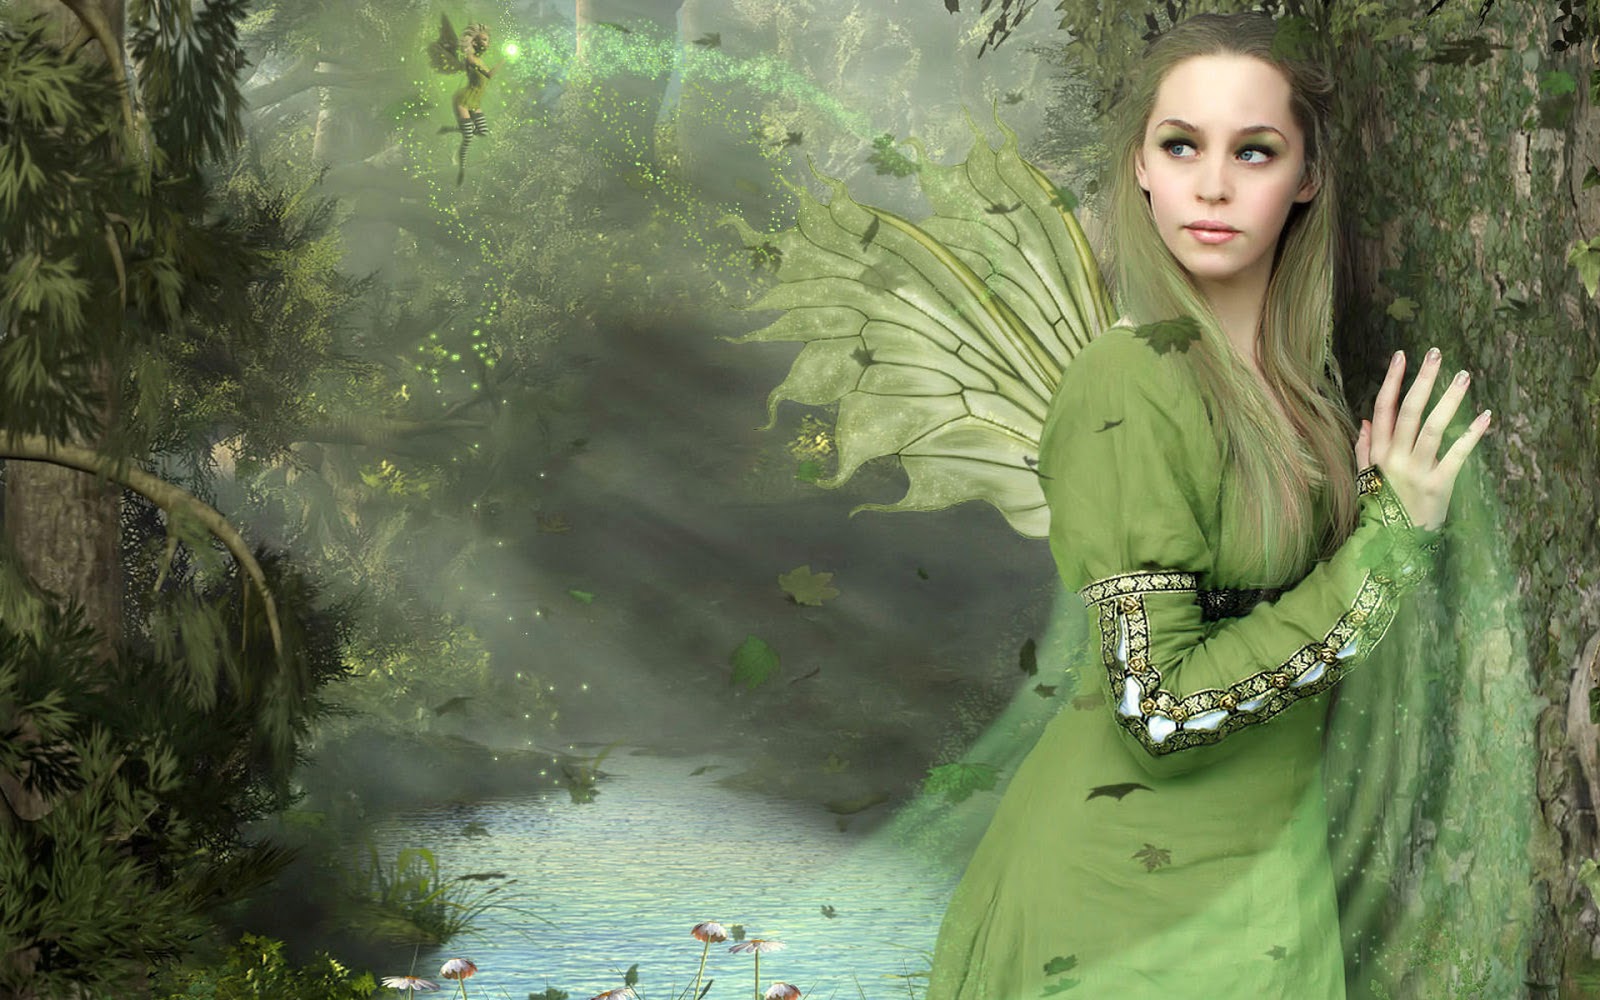 Fantasy Angel Photoshop Designs HD wallpapers 1920x1200 Free download